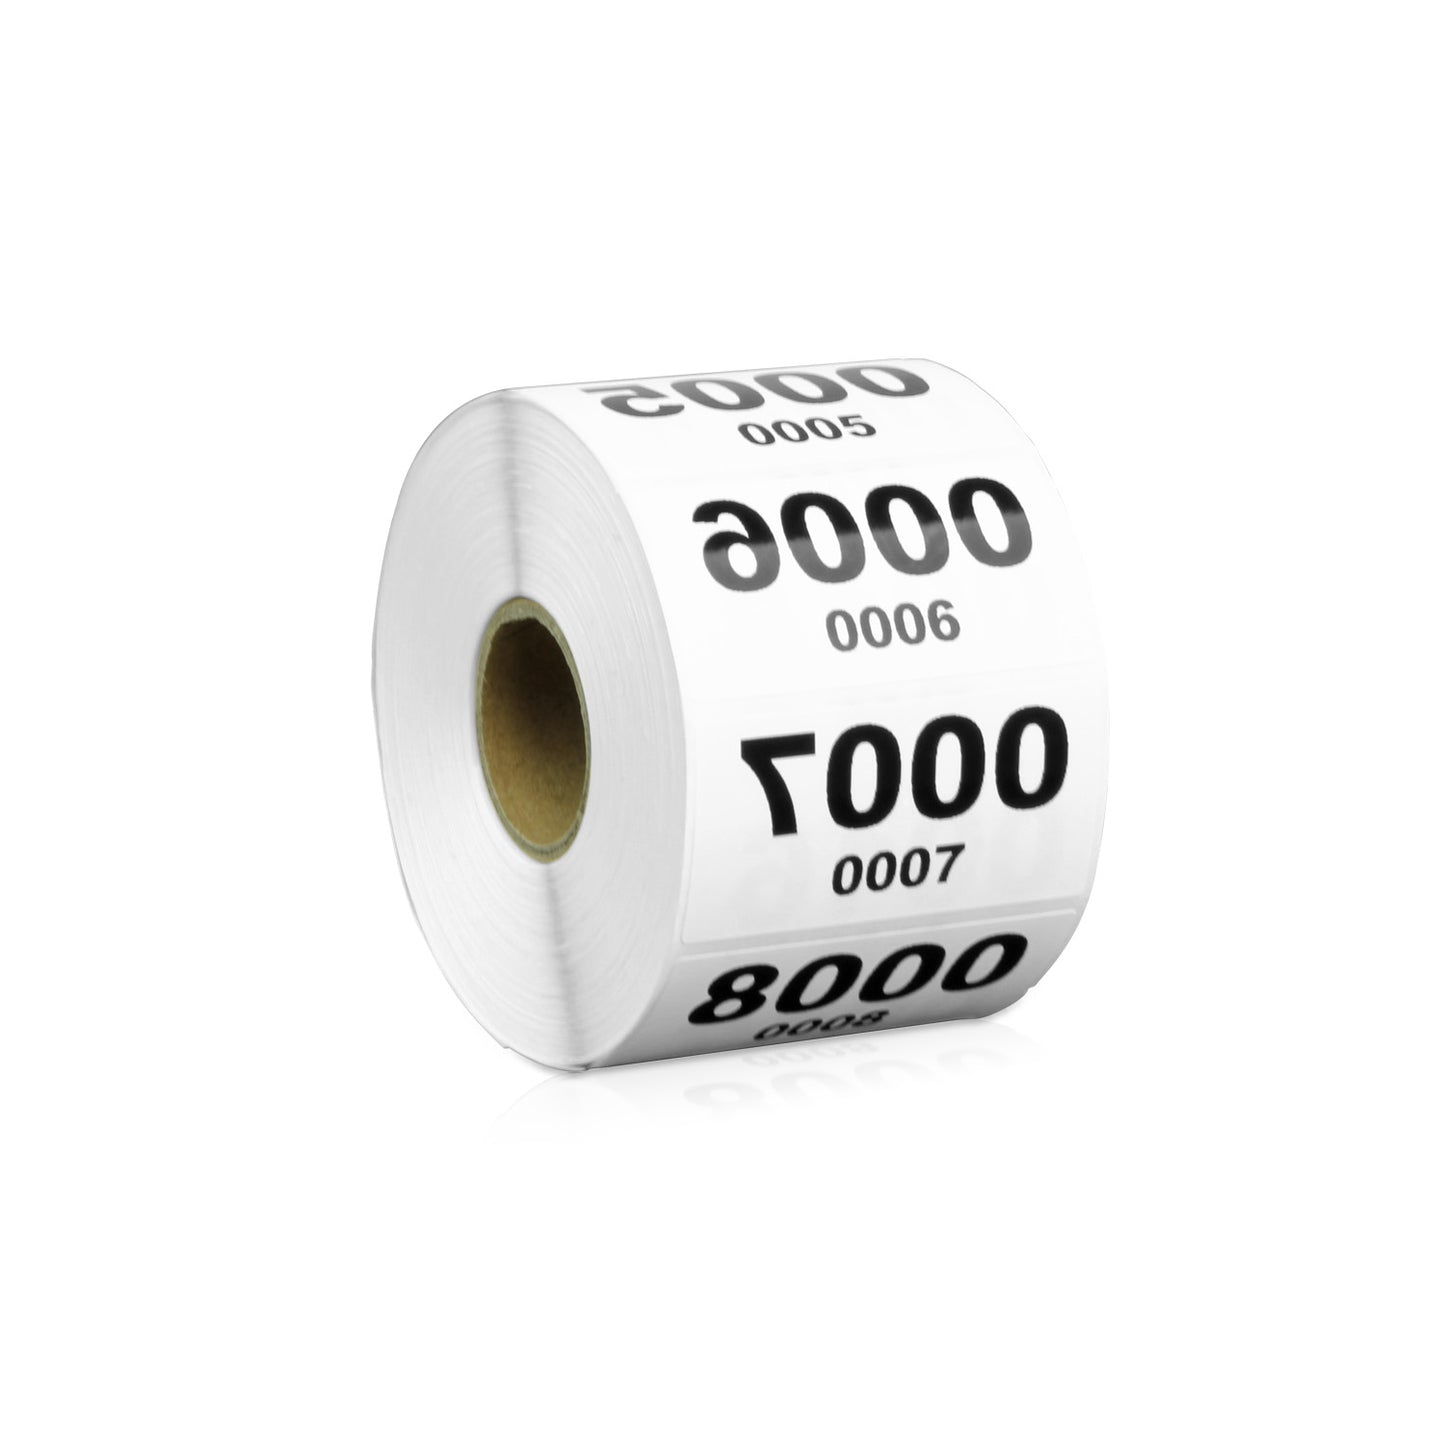 2 x 1 inch | Inventory: Reverse Numbered "0001-1000" Consecutive Numbers Stickers